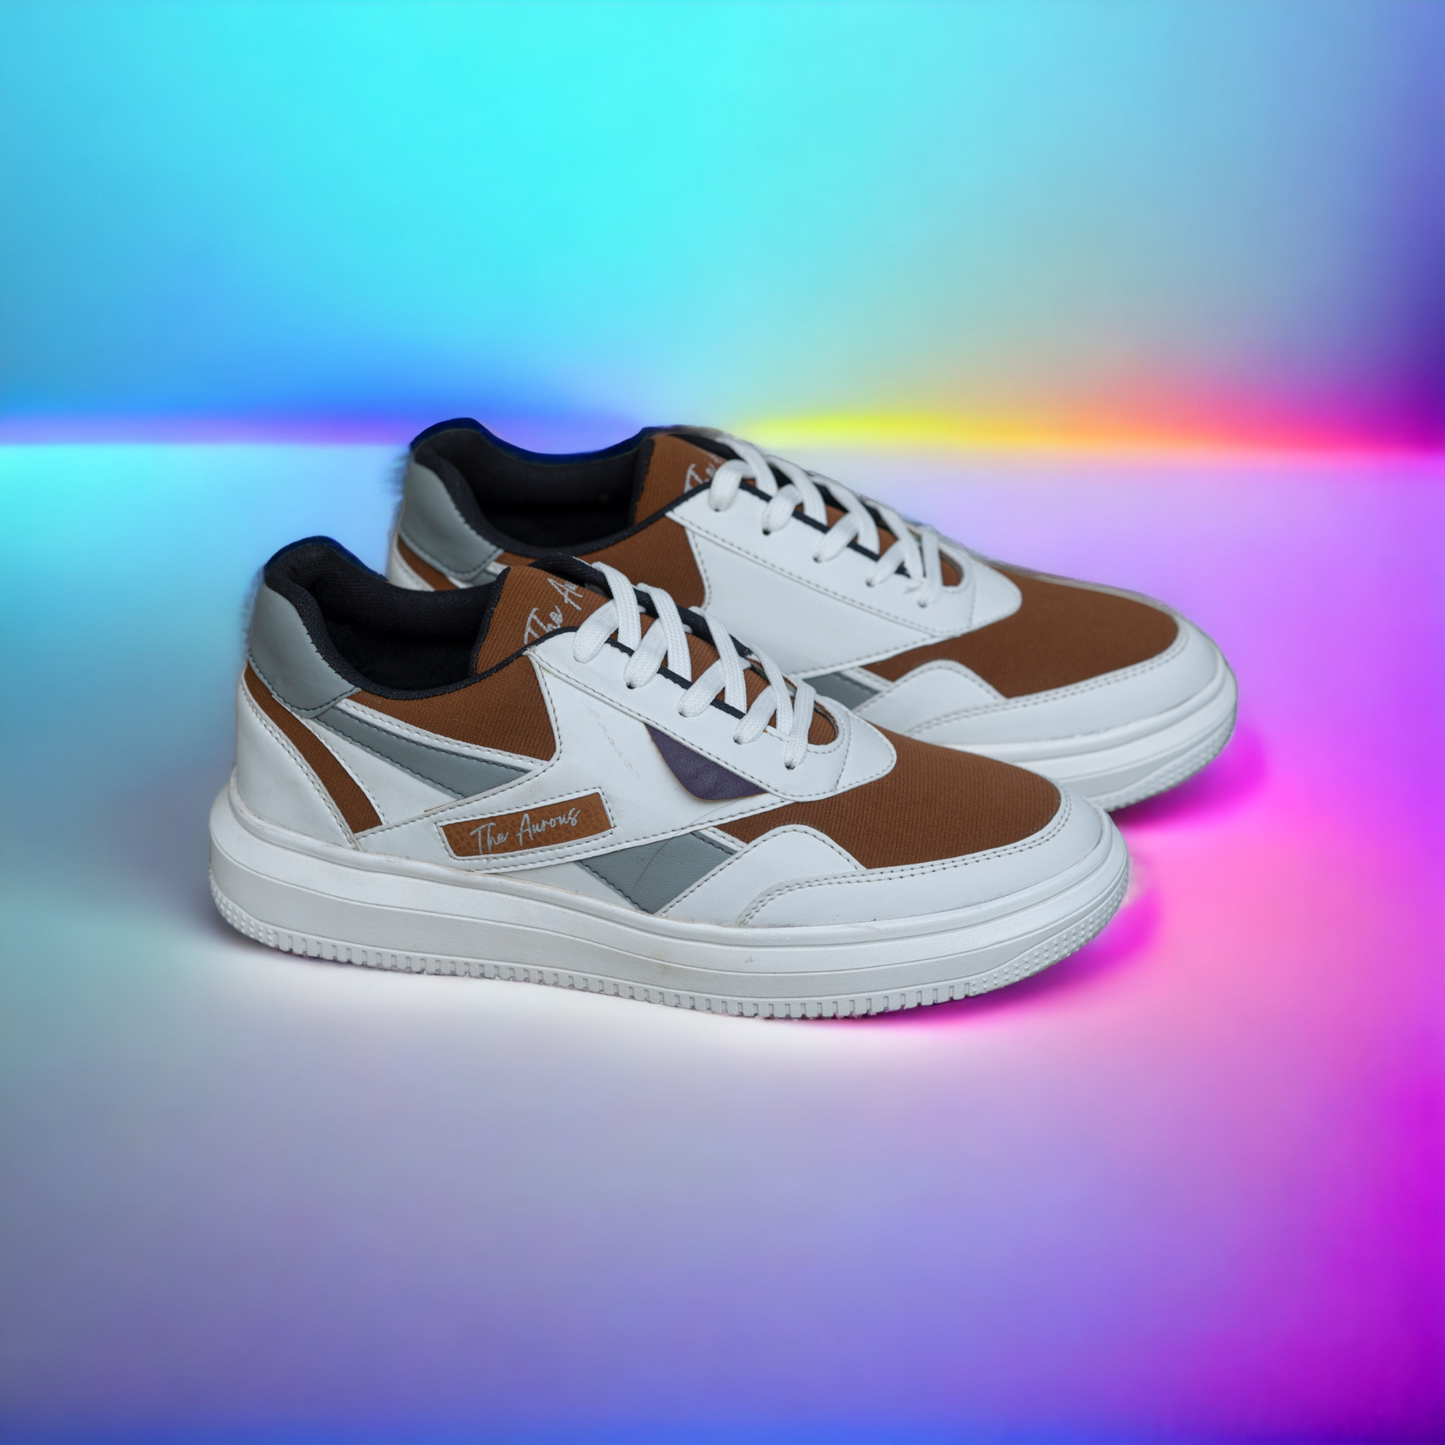 The Aurous Velocity Laceup Sneakers